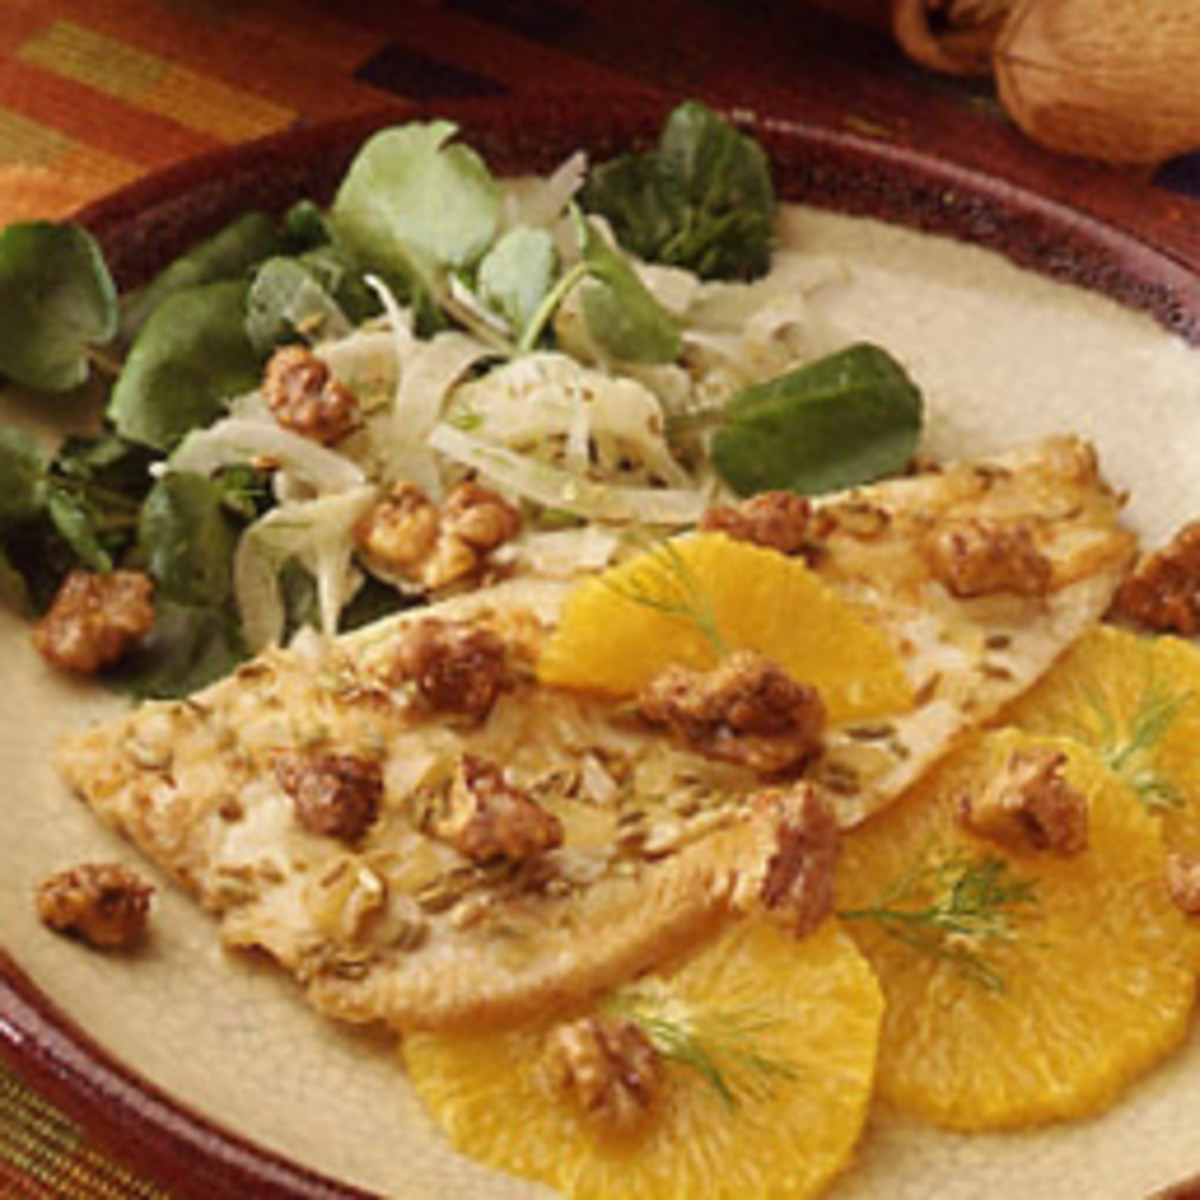 Orange Trout Salad with Spiced Walnuts